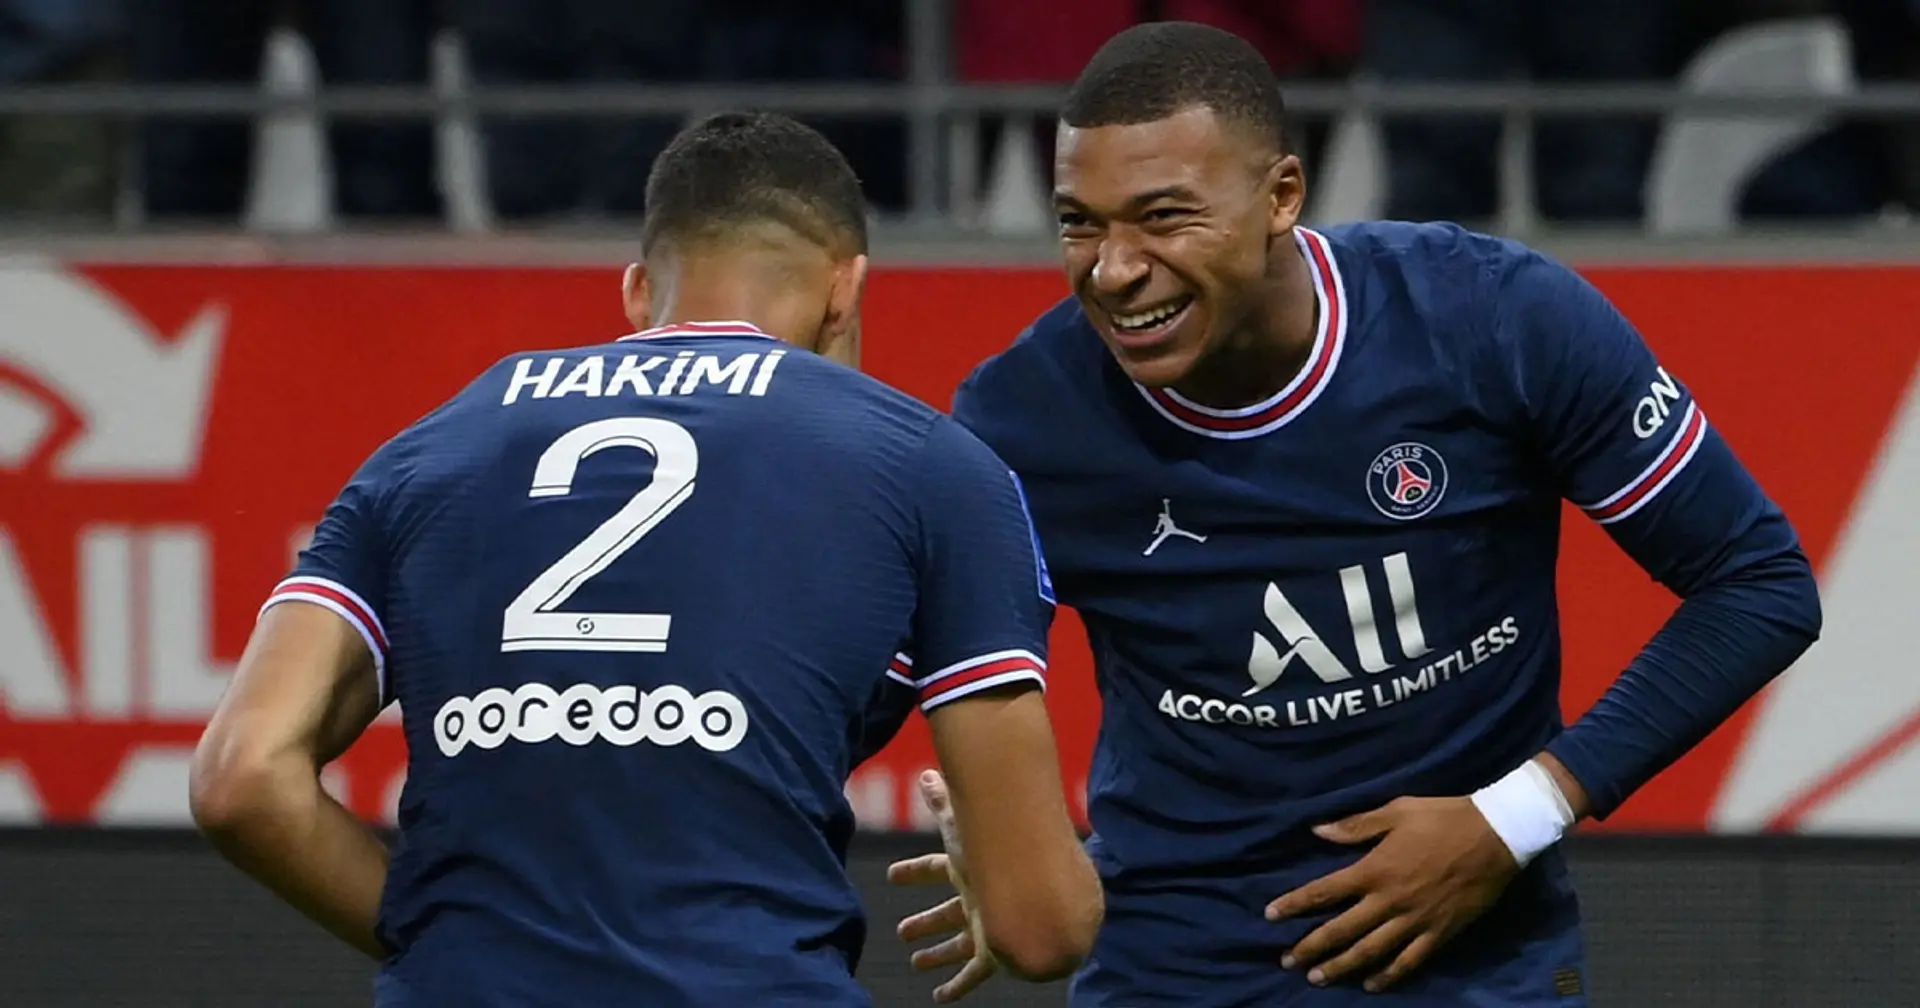 Mbappe scores brace against Reims - could it be his last game for PSG?